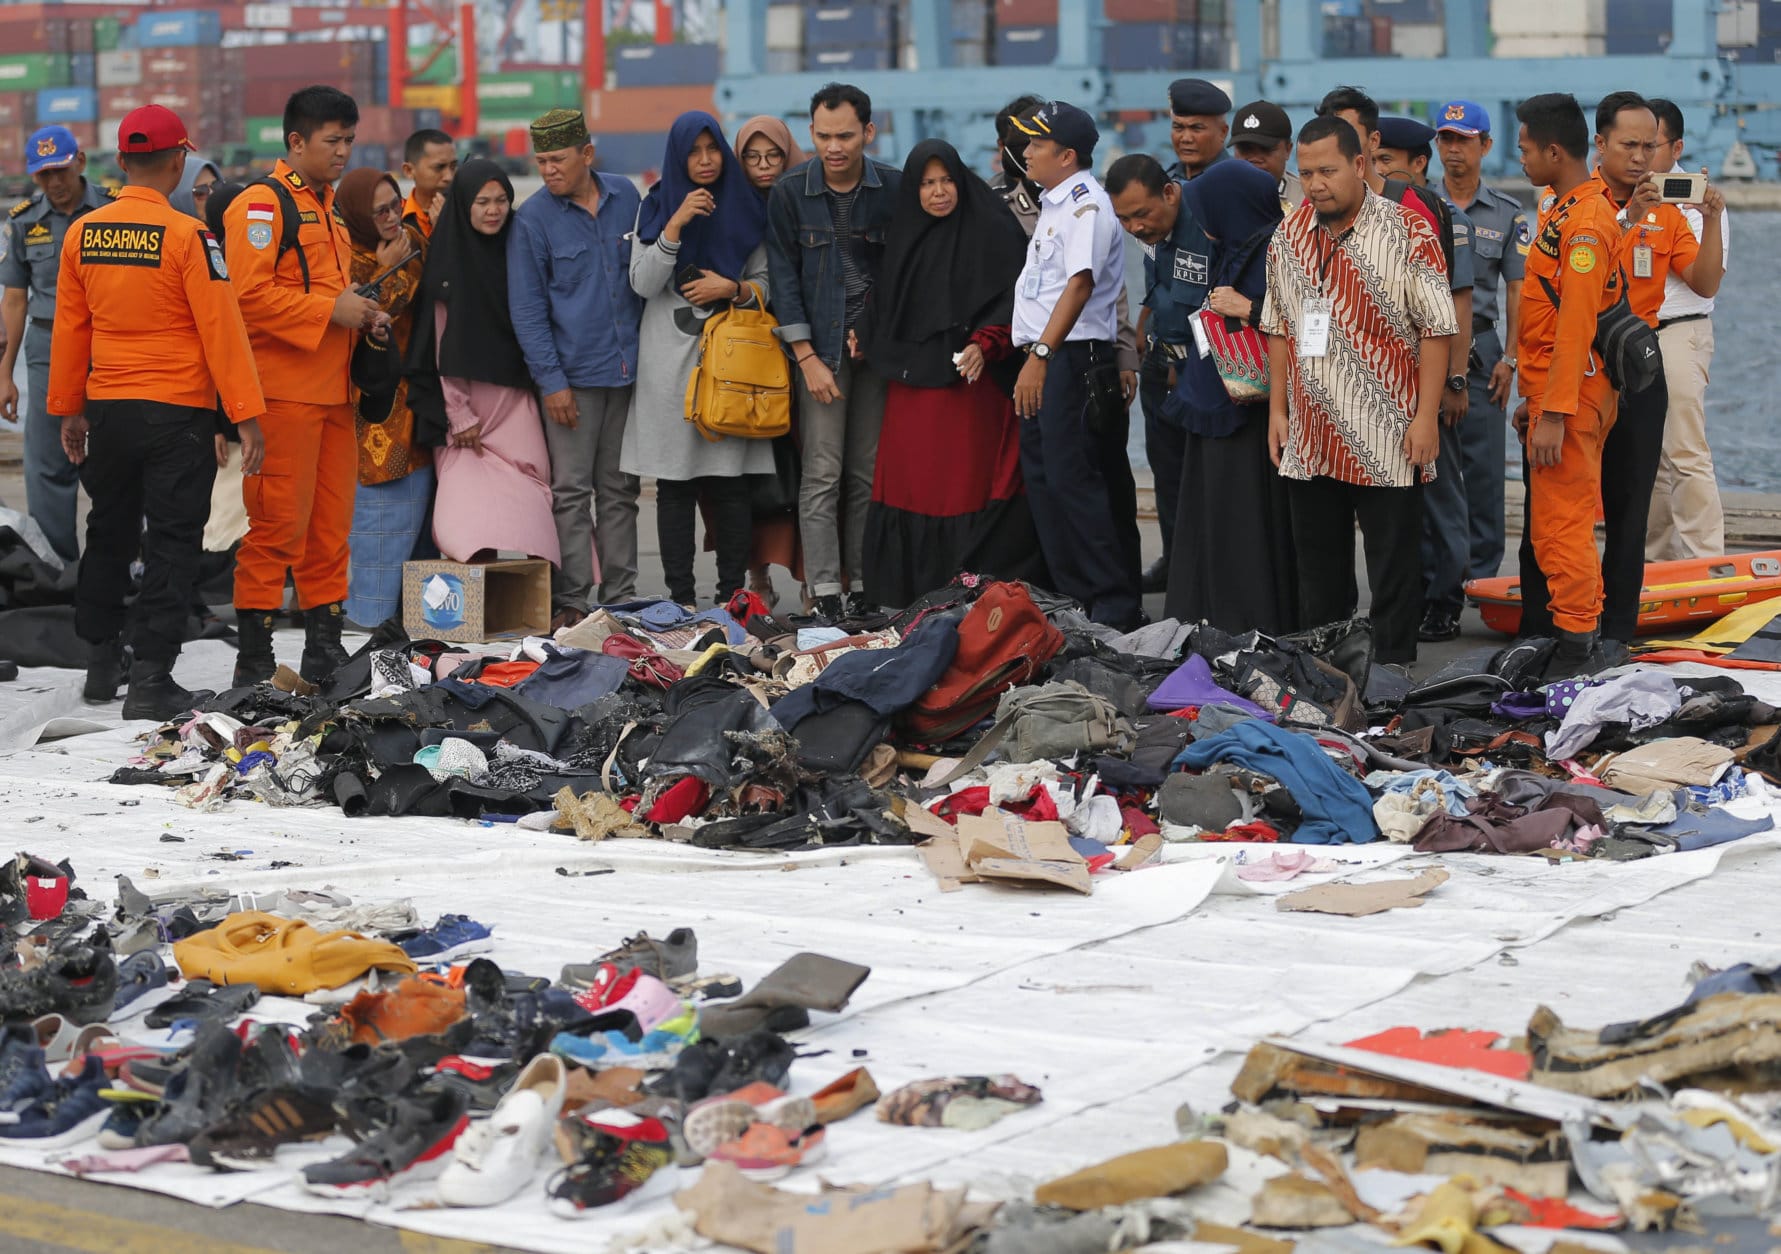 Relatives of passengers on the crashed Lion Air jet check personal belongings retrieved from the waters where the airplane is believed to have crashed, at Tanjung Priok Port in Jakarta, Indonesia, on Oct. 31, 2018. (AP Photo/Tatan Syuflana)